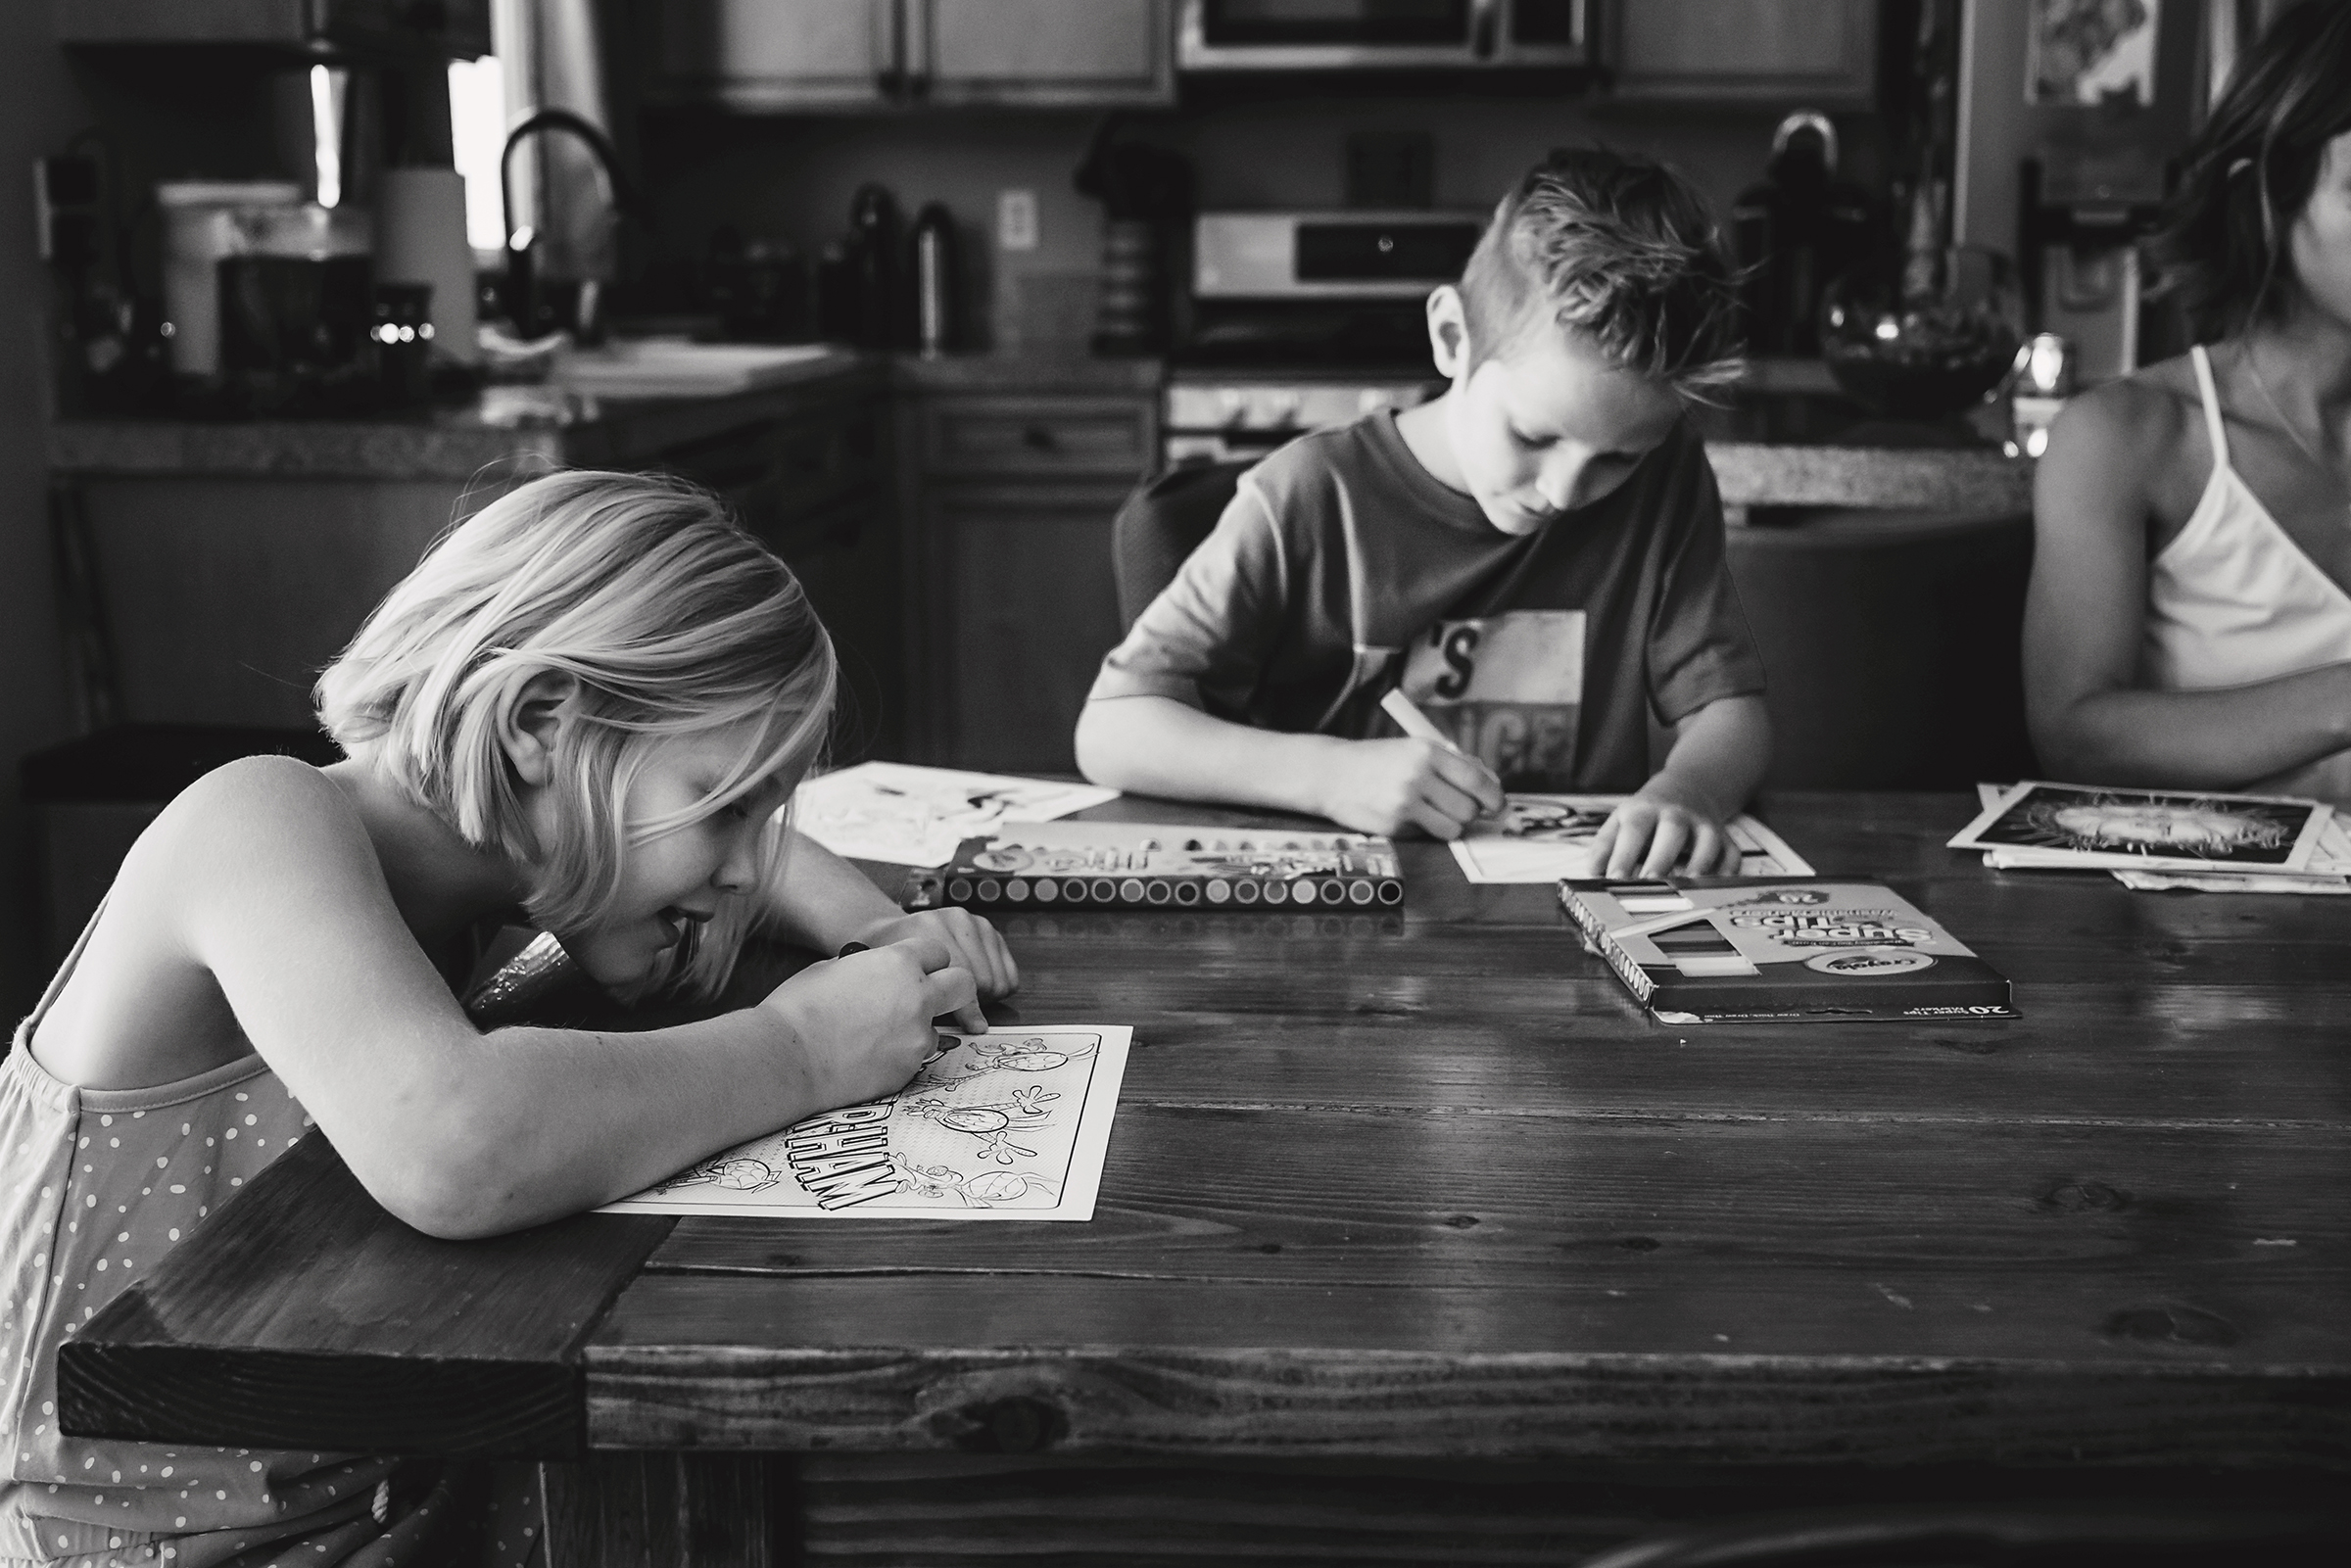 brother and sister coloring together at kitchen table